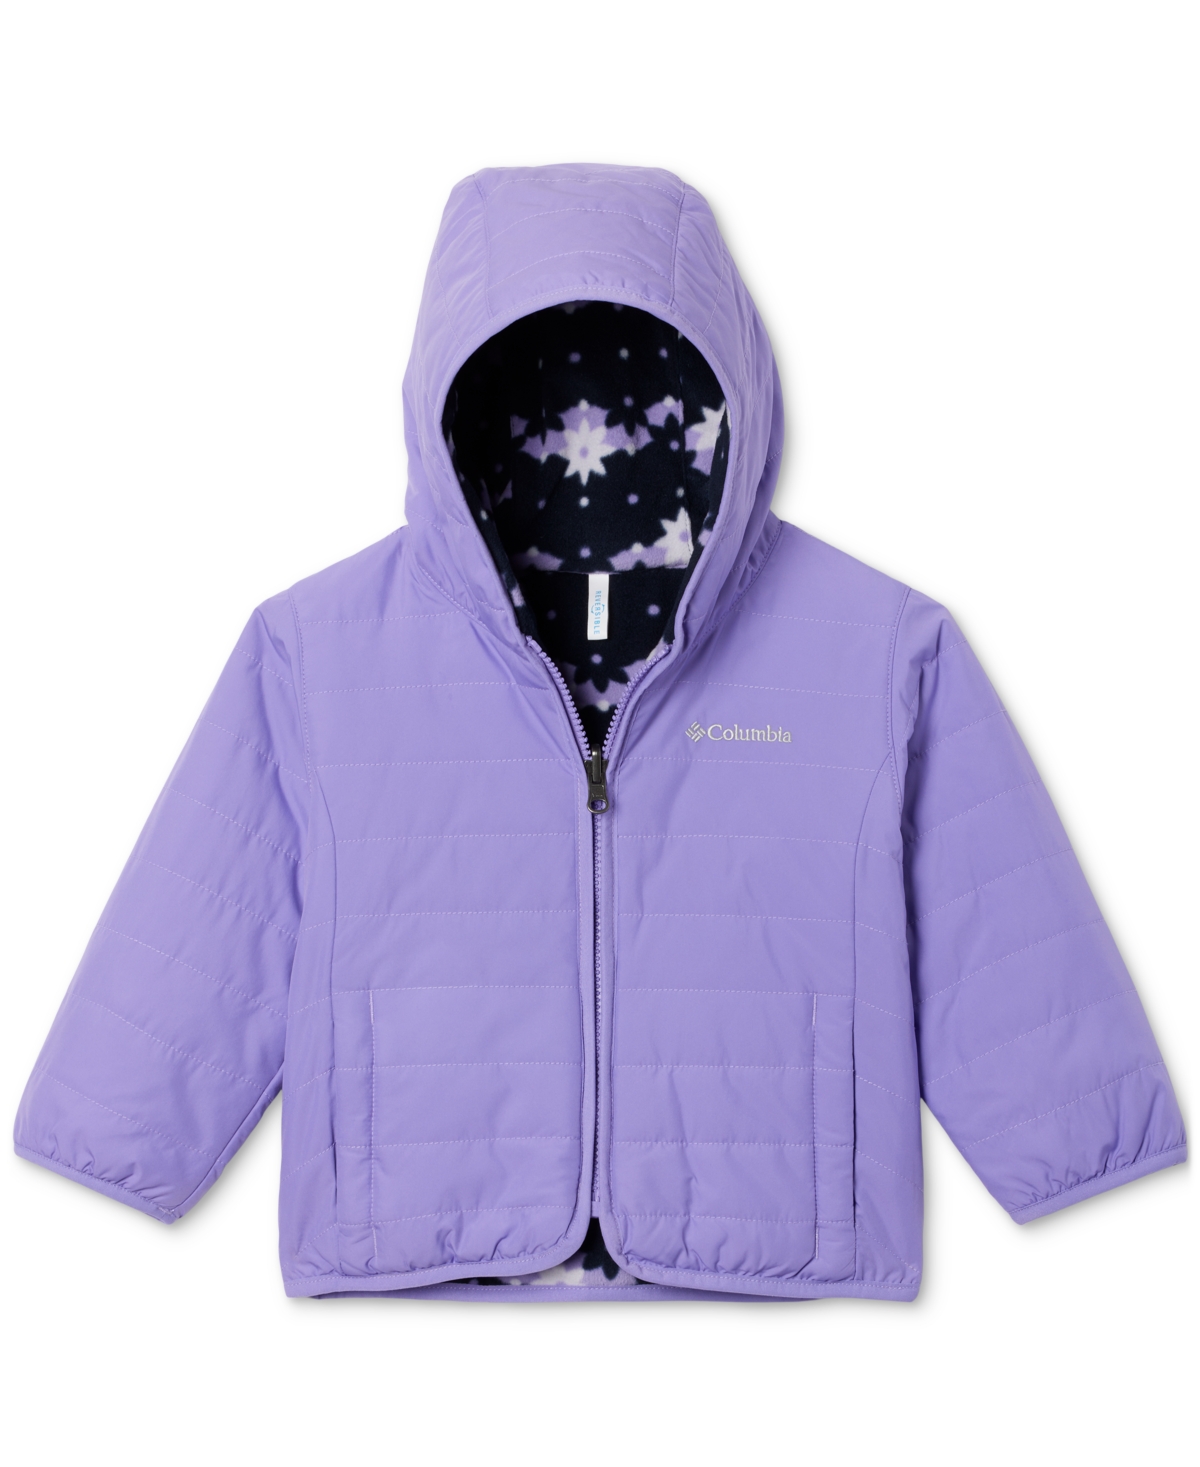 Columbia Kids' Toddler Girls Double Trouble Jacket In Paisley Purple